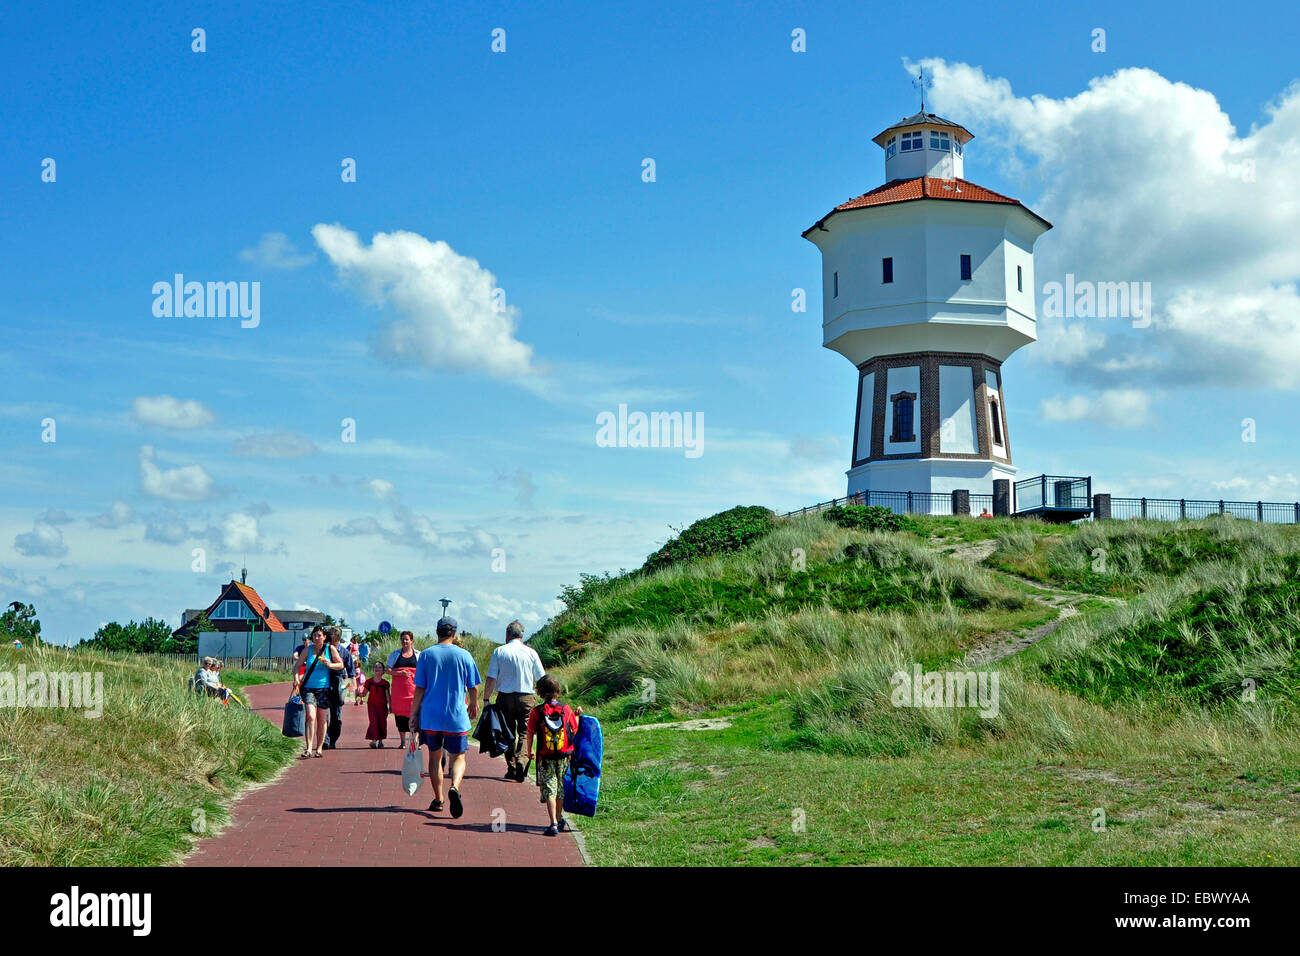 tourists at the water tower on Langeoog island, Germany, Lower Saxony, Langeoog Stock Photo